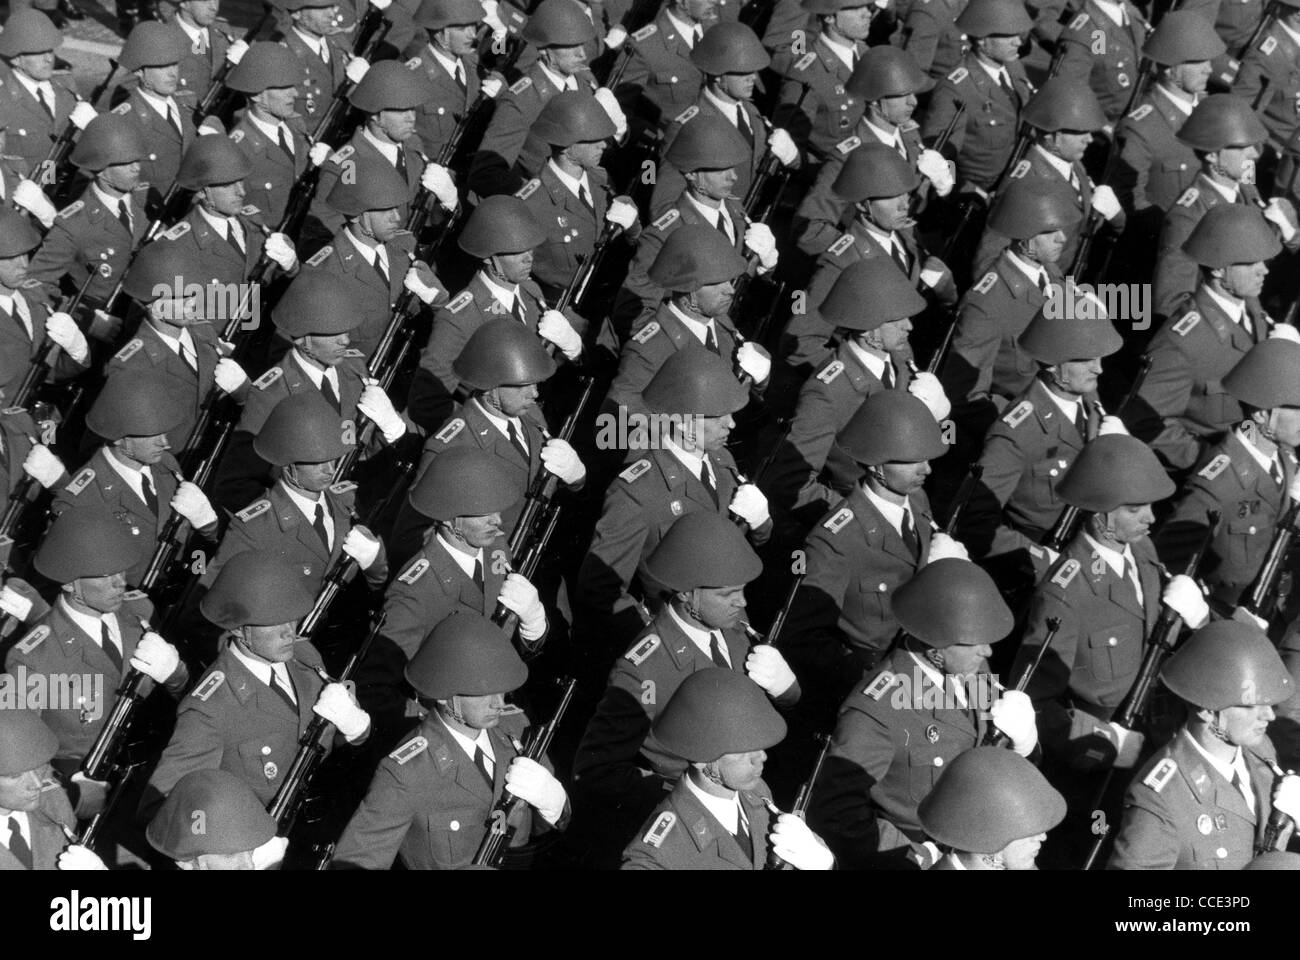 Military parade of the National People's Army of the GDR 1979 in East Berlin. Stock Photo